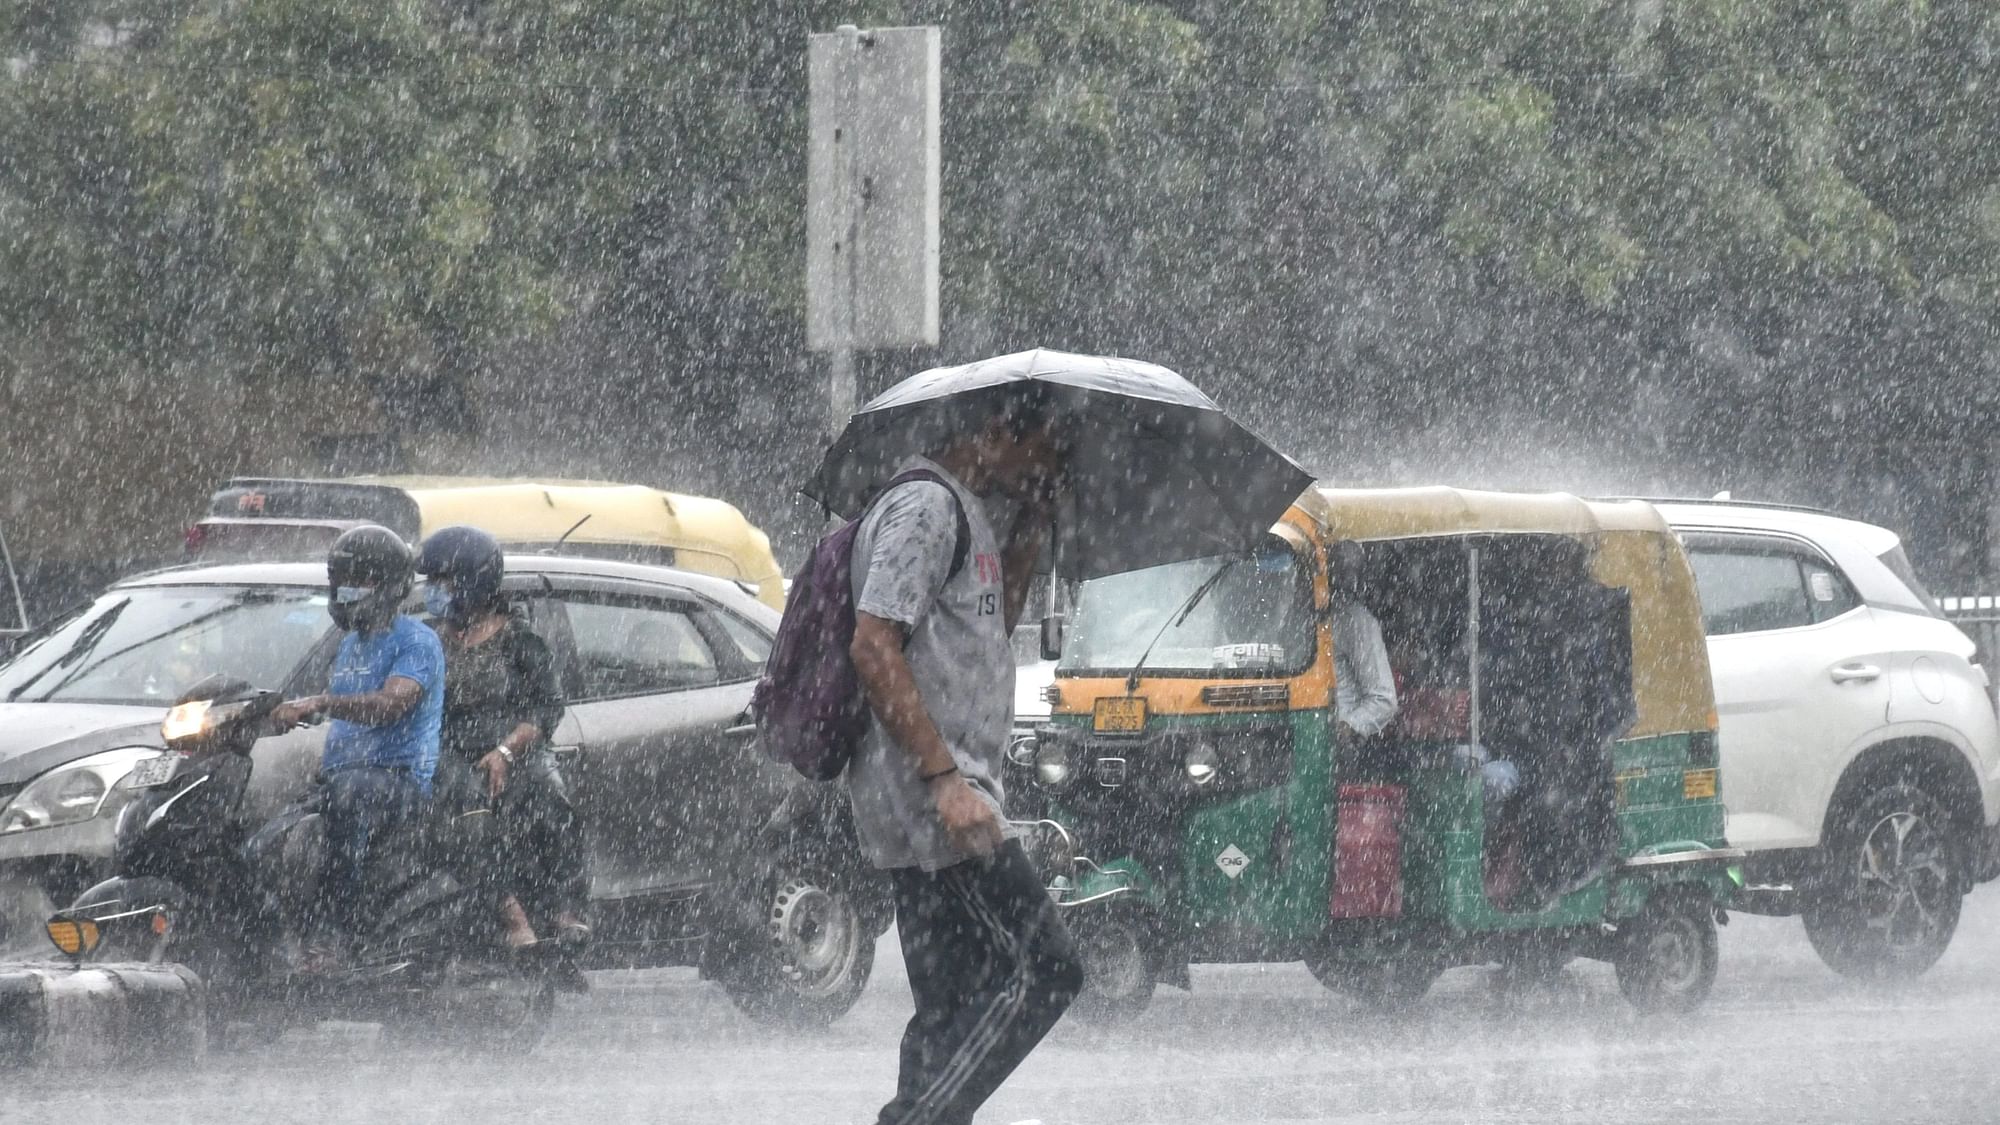 <div class="paragraphs"><p><a href="https://www.thequint.com/news/india/maharashtra-gujarat-monsoon-rains-floods#read-more">Heavy rain</a> poured down on Delhi and its surrounding areas on the morning of Tuesday, 12 July, leading to severe waterlogging in some parts.</p></div>